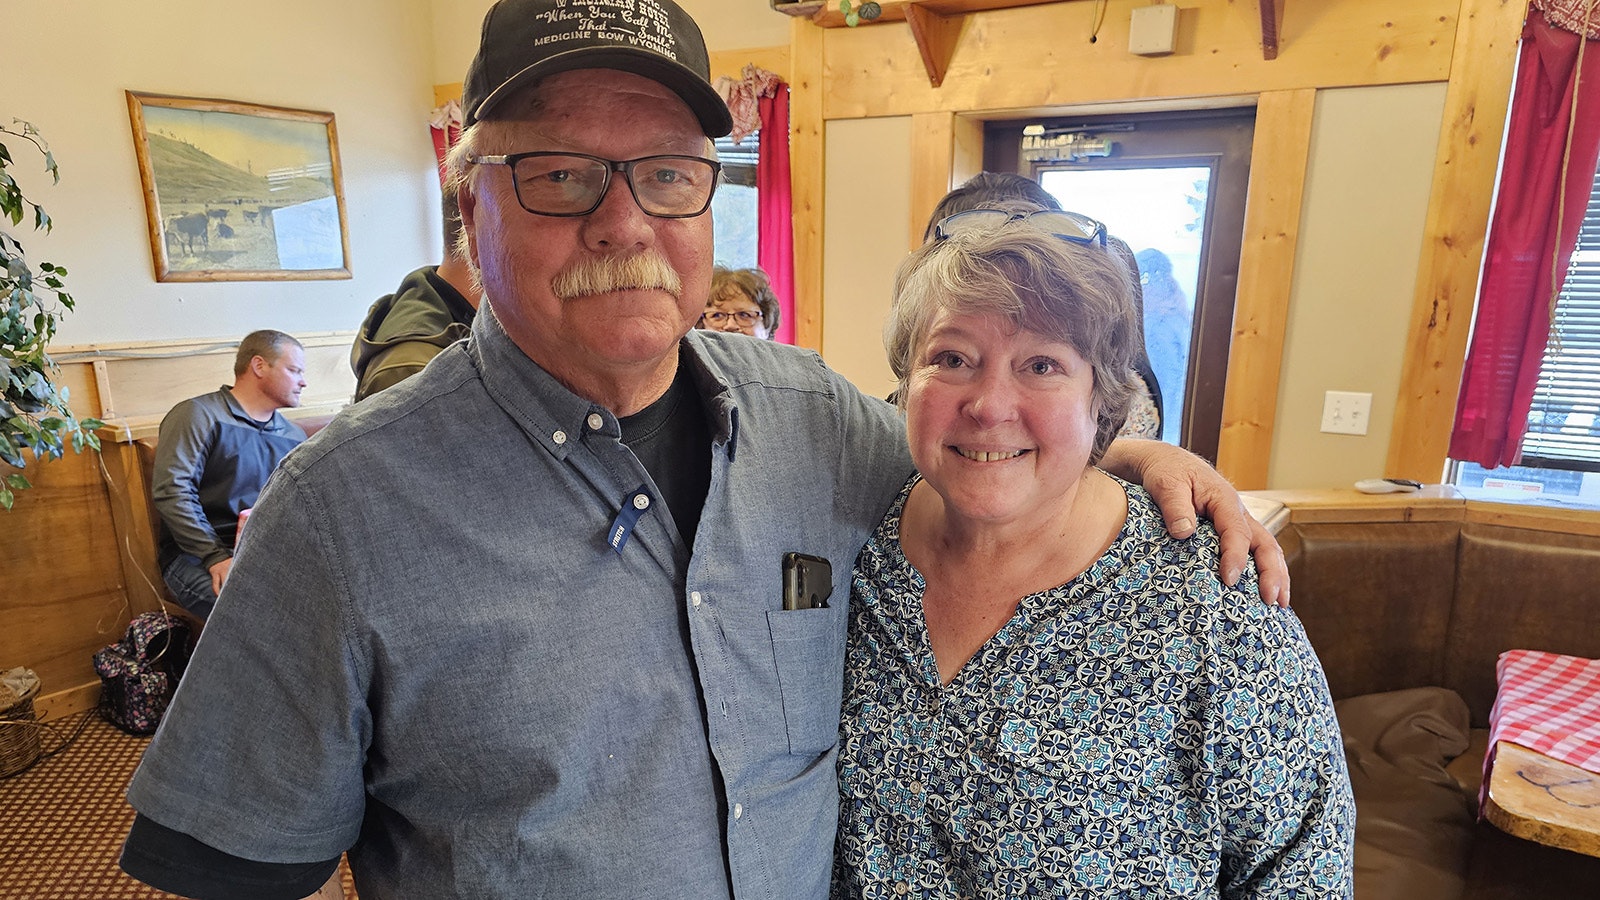 Vernon and Vickie Scott ran The Virginian Hotel for 40 years as fourth-generation owners of the historic Wyoming landmark.